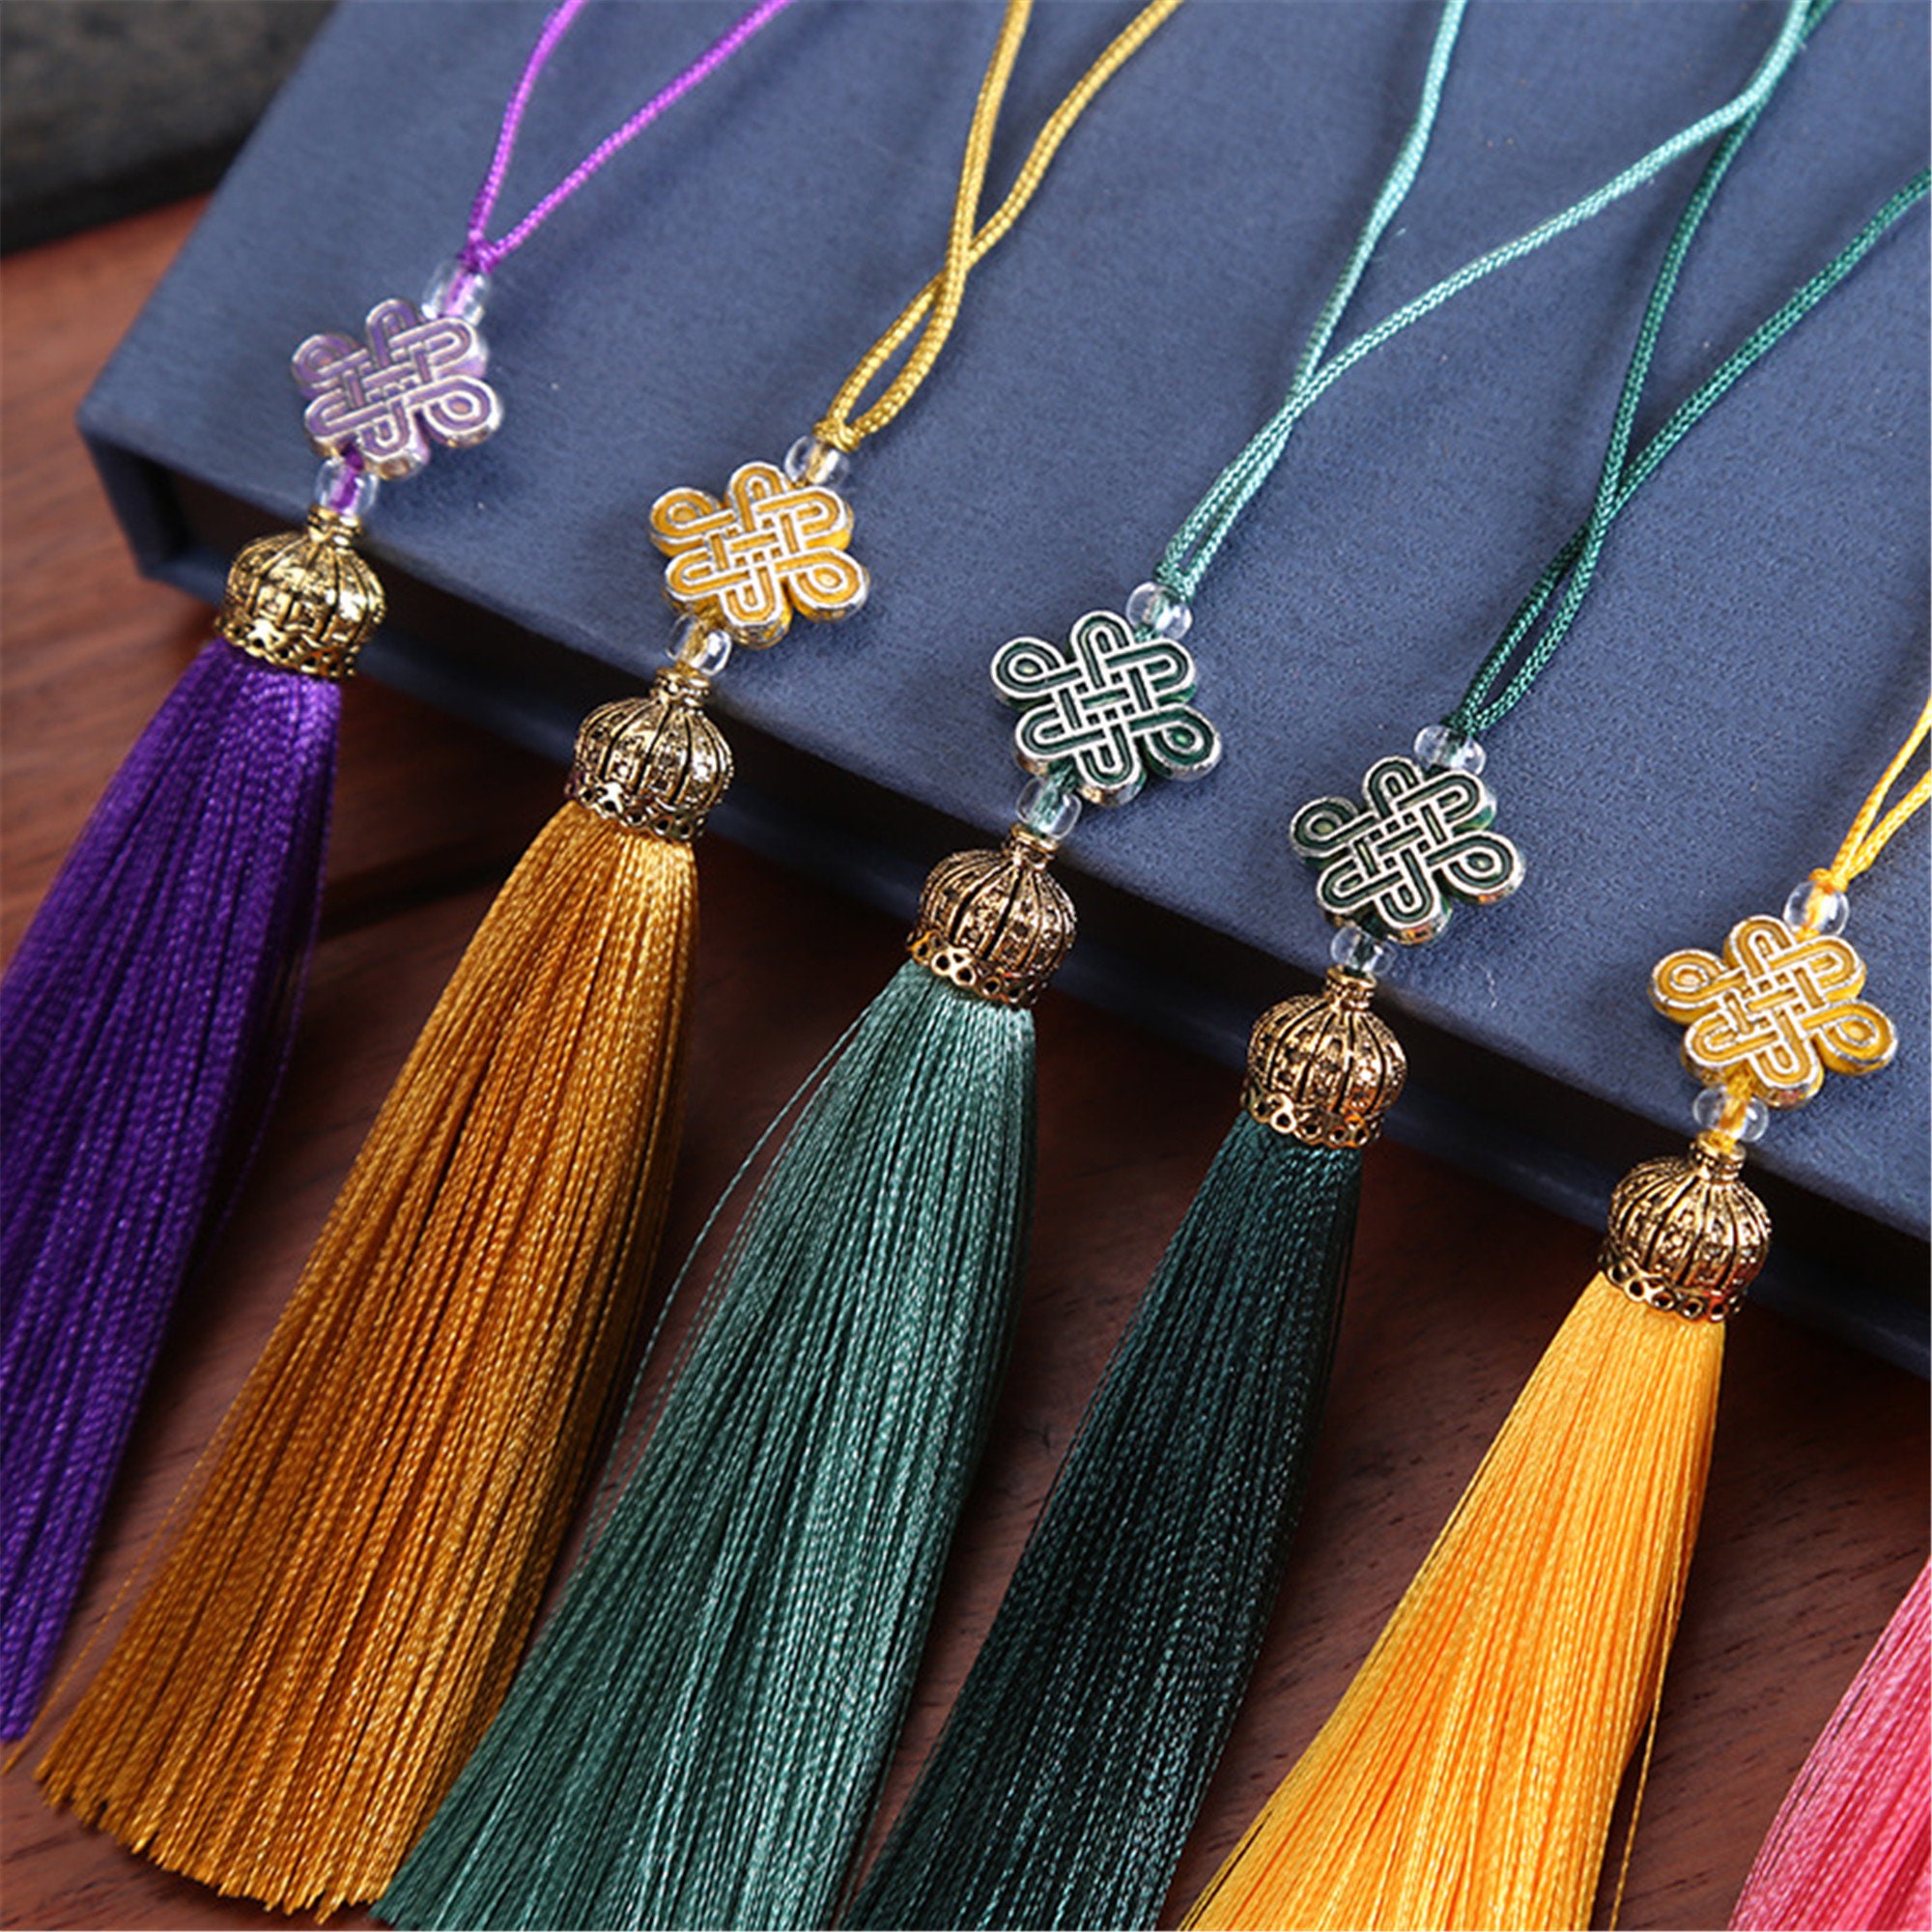 29 Color to Choose,100mm Silk Tassel With Alloy Cap Pendant,tassel  Craft,silk Tassel Pendant ,high Quality Extra Thick LP046 - Etsy